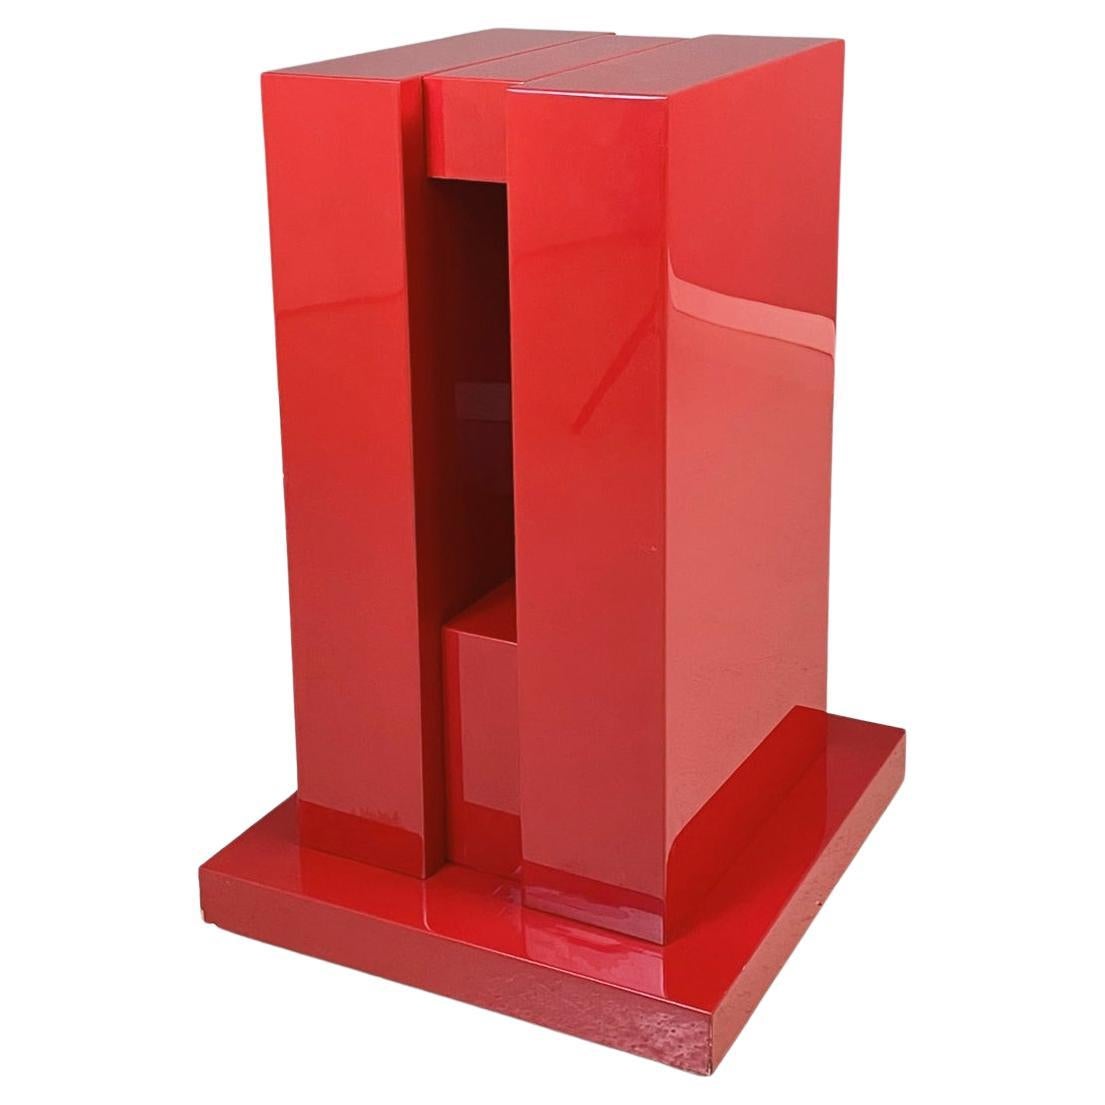 Italian Midcentury Geometric Pedestal in Red Lacquered Wood, 1980s For Sale